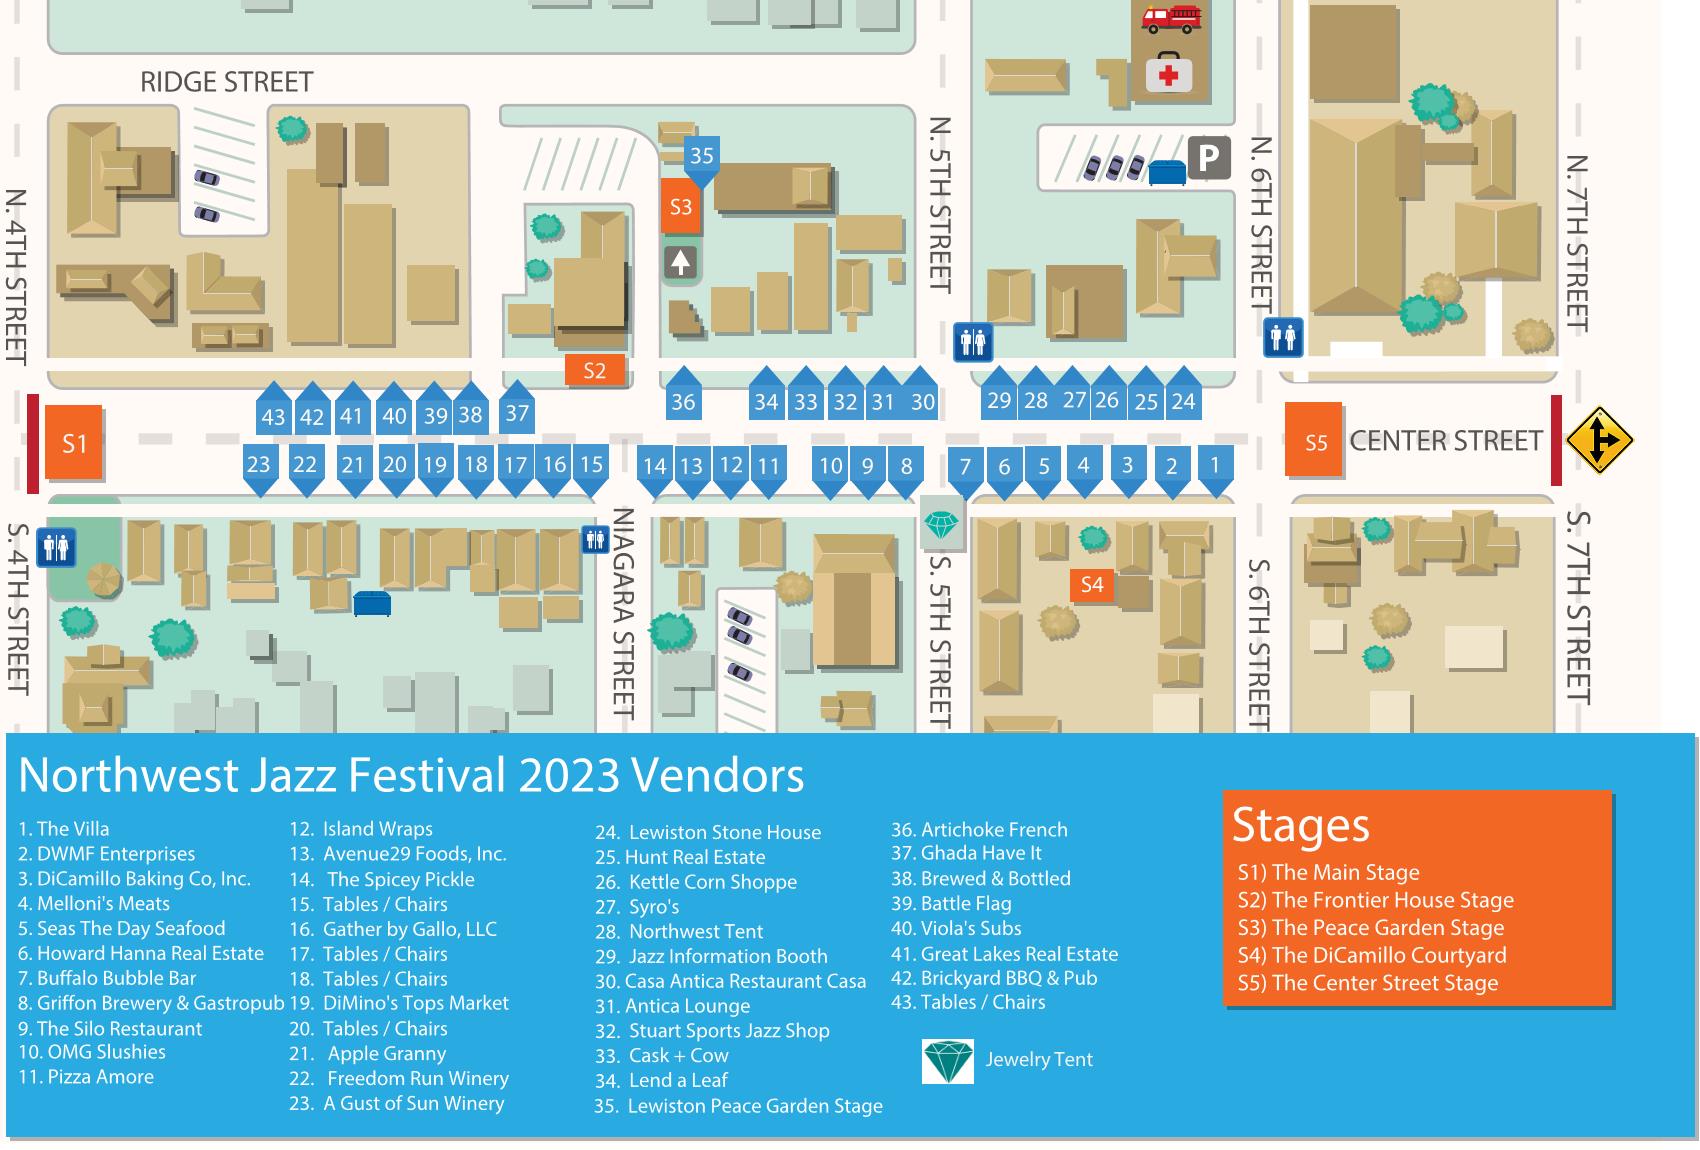 The Jazz Festival released the following vendor map.